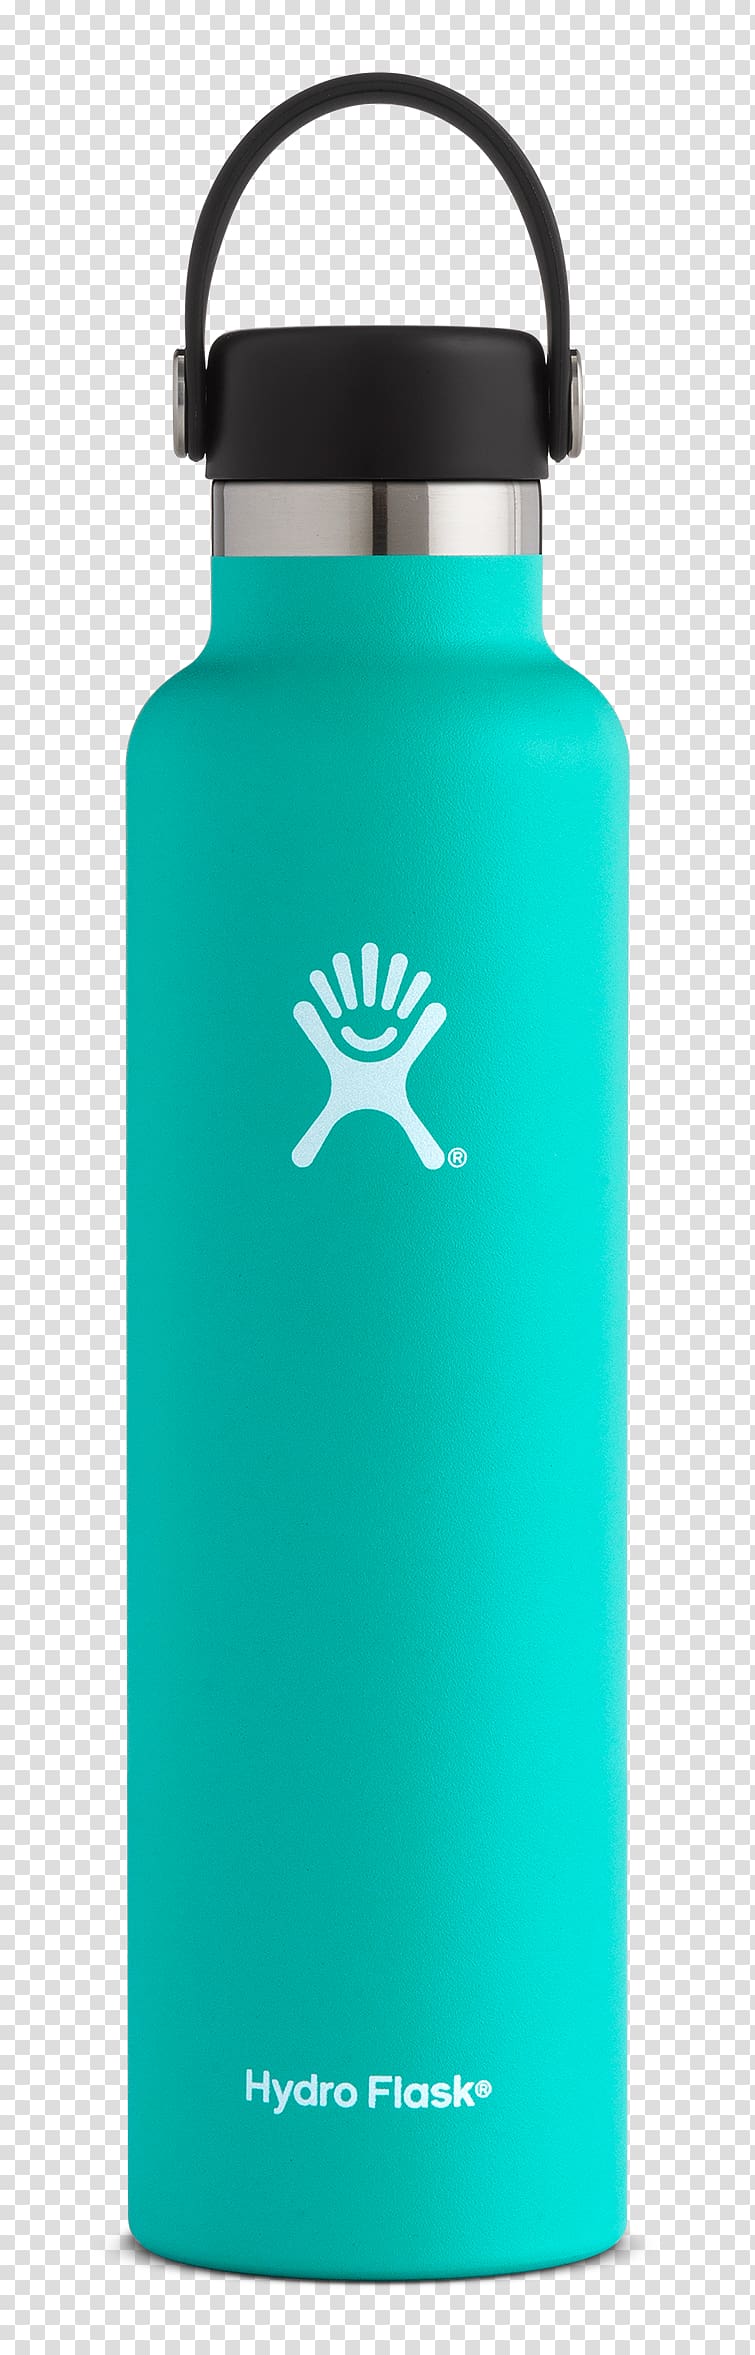 Hydro Flask Wide Mouth Water Bottles Ounce Drink, bottle transparent background PNG clipart